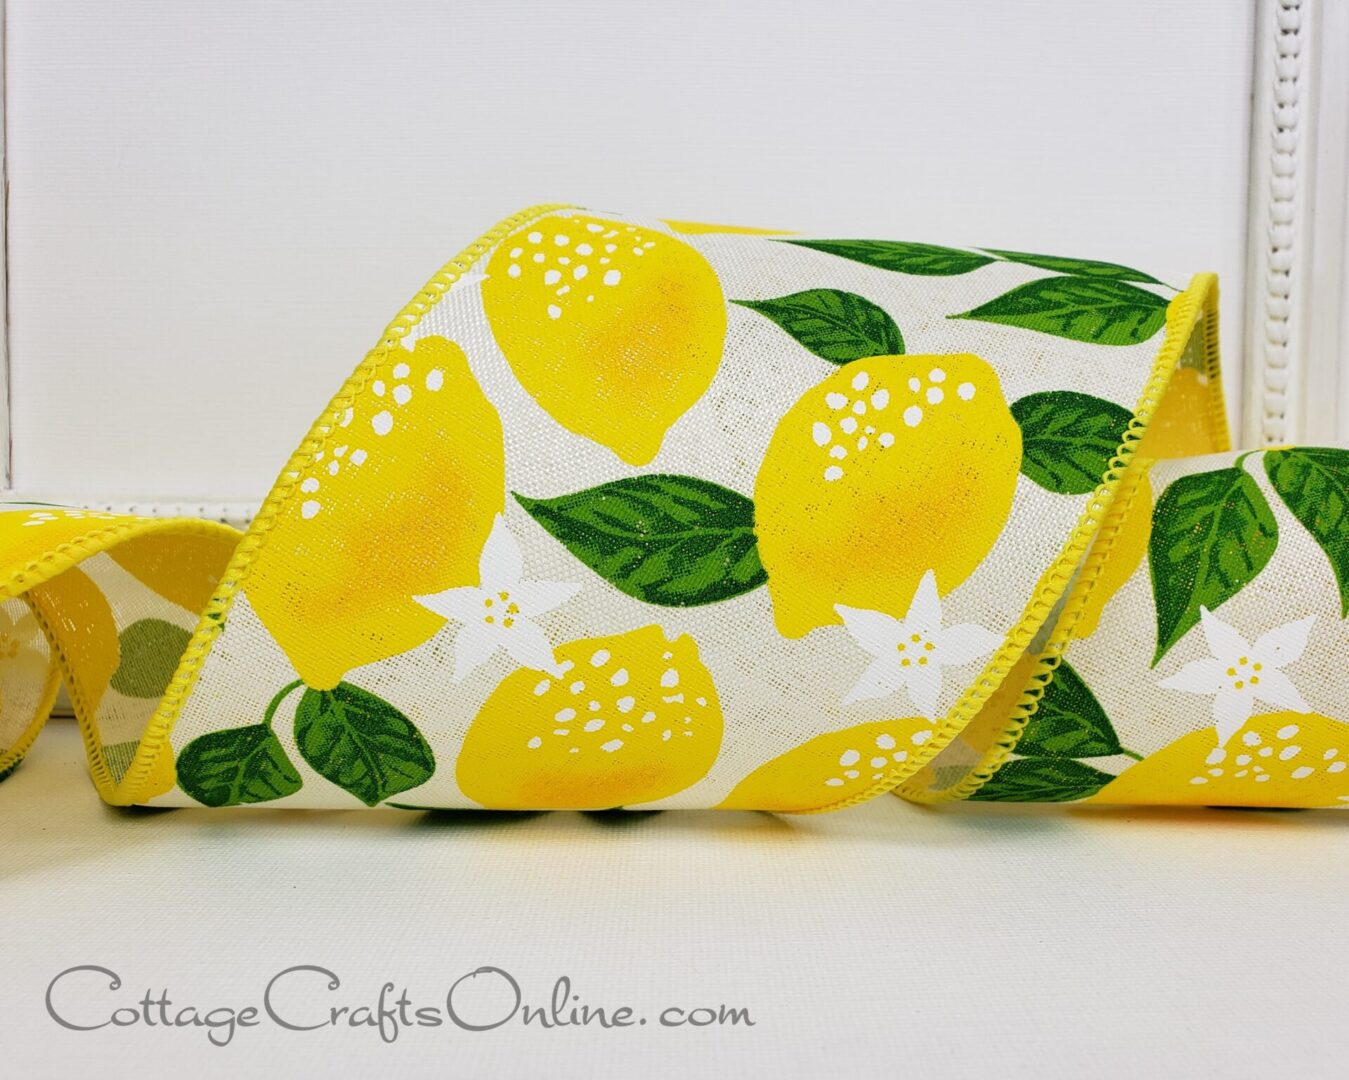 A ribbon with lemons and leaves design